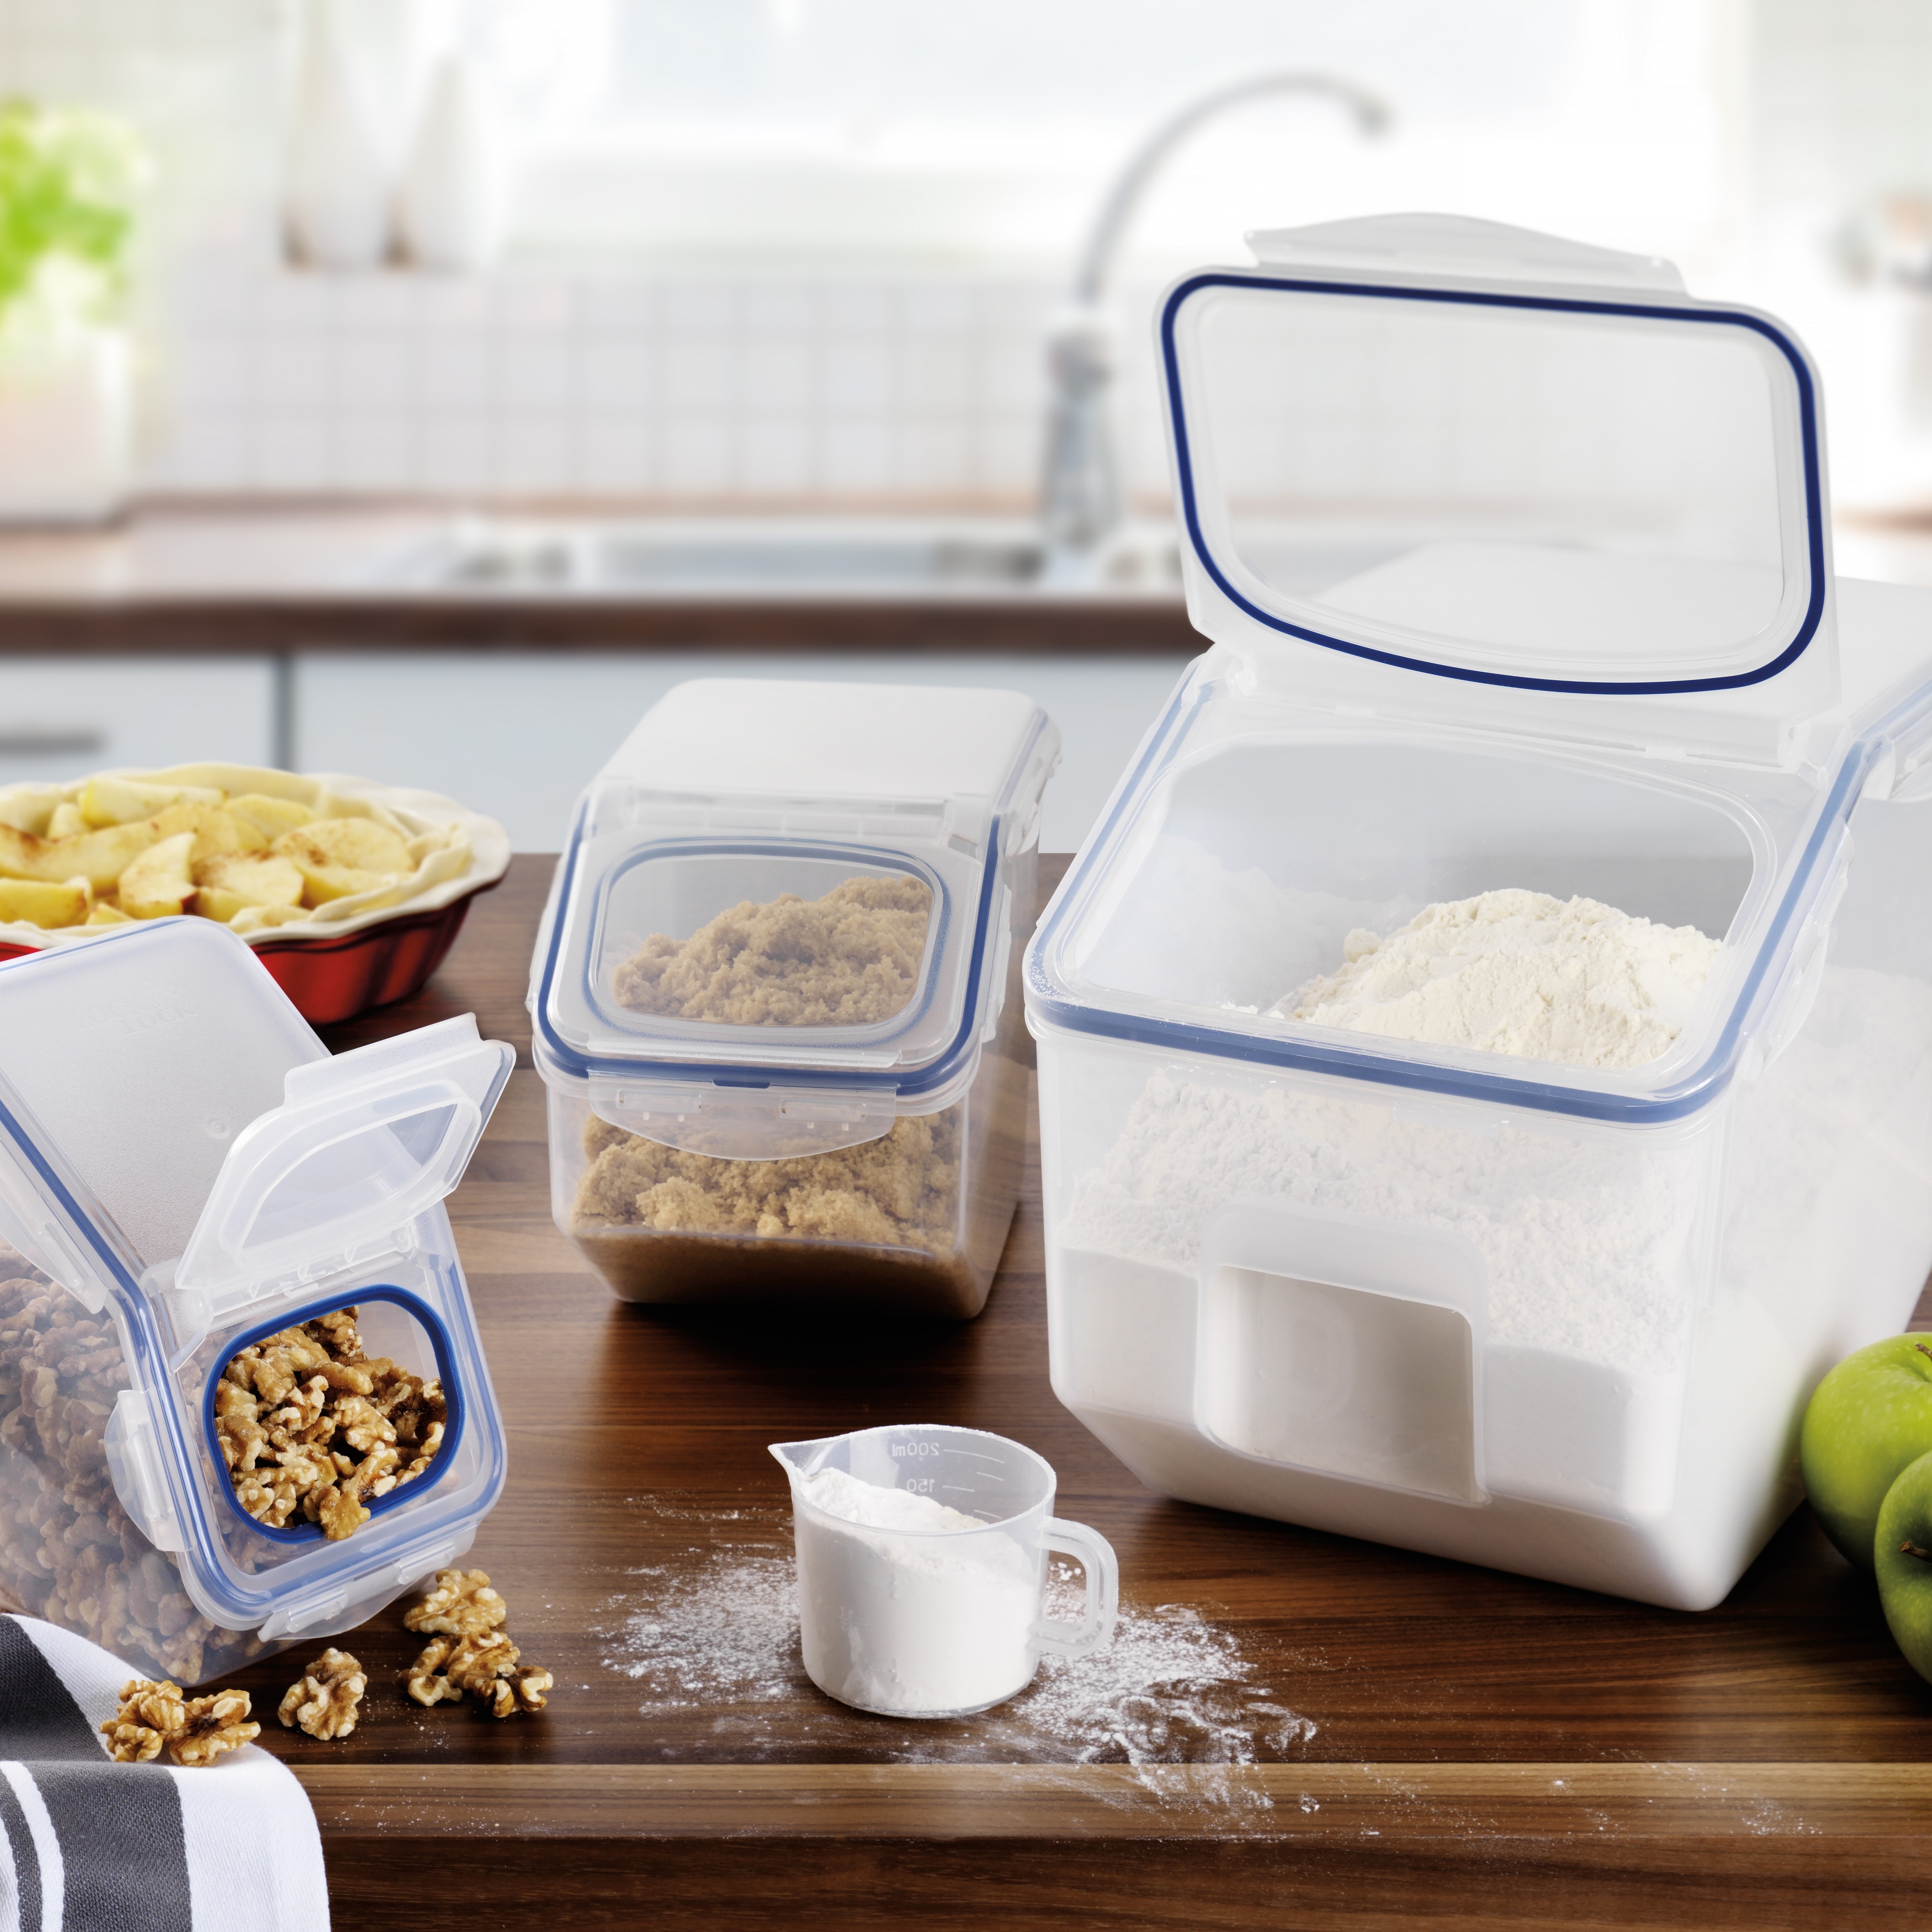 https://ak1.ostkcdn.com/images/products/is/images/direct/3bf031181f0b529c05235293d03cfdd9ca139afe/LocknLock-Pantry-Rectangular-Food-Storage-Container-Set%2C-3-Piece%2C-Clear.jpg